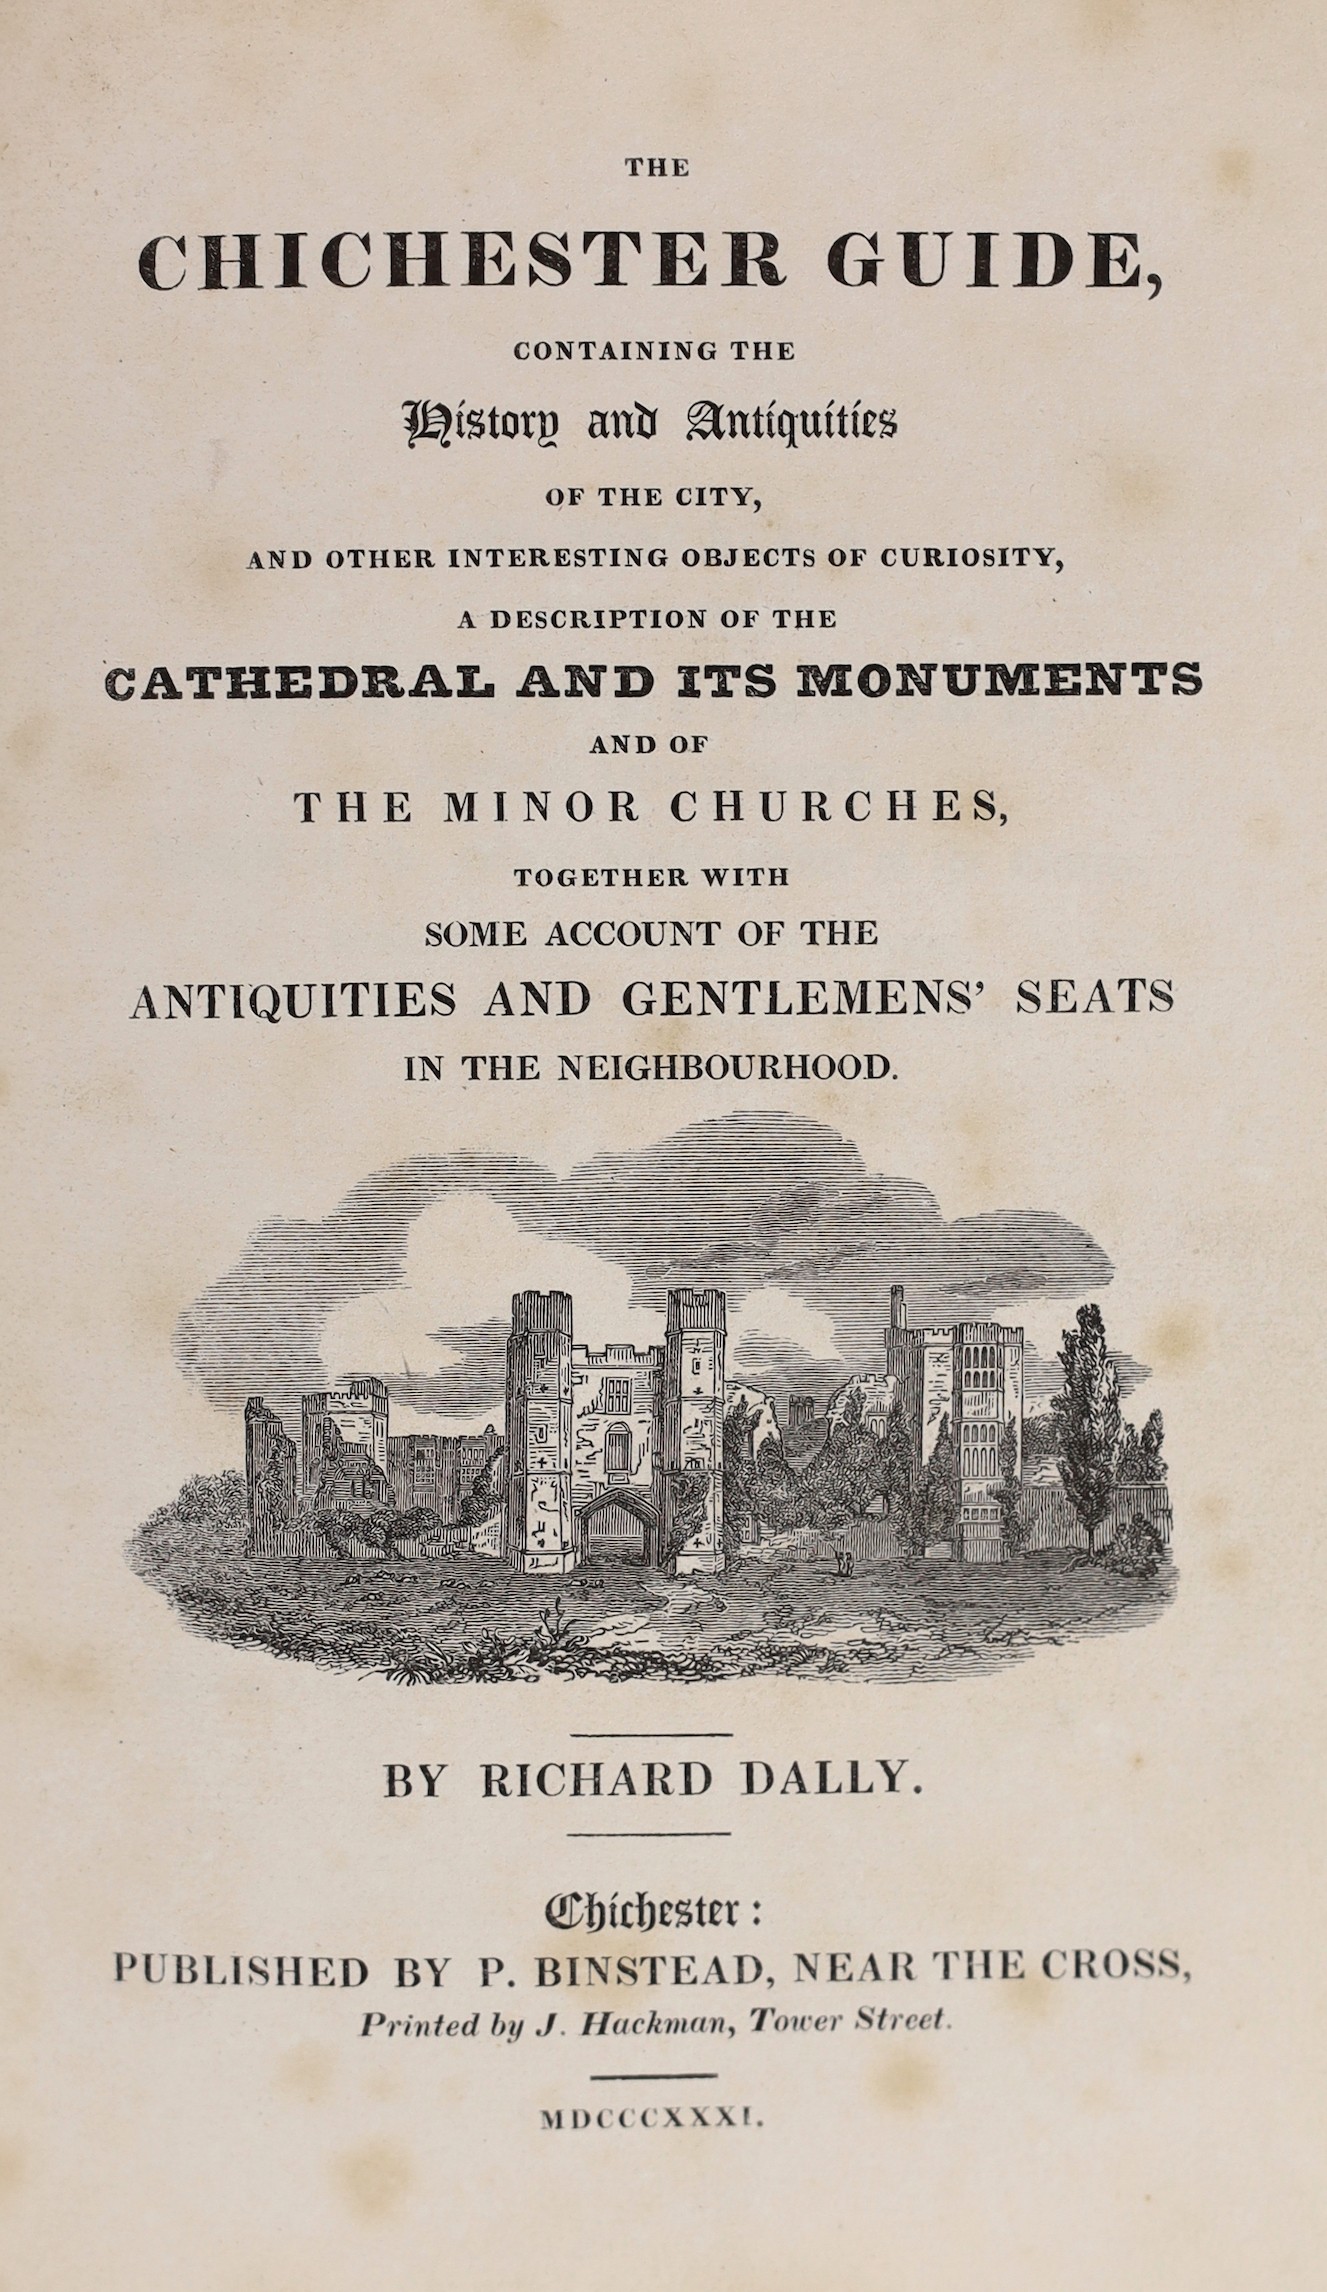 CHICHESTER: Dally, Richard - The Chichester Guide, containing the history and antiquities ... together with some account of the antiquities and gentlemen's seats in the neighbourhood. 2 plates and text illus.; original c